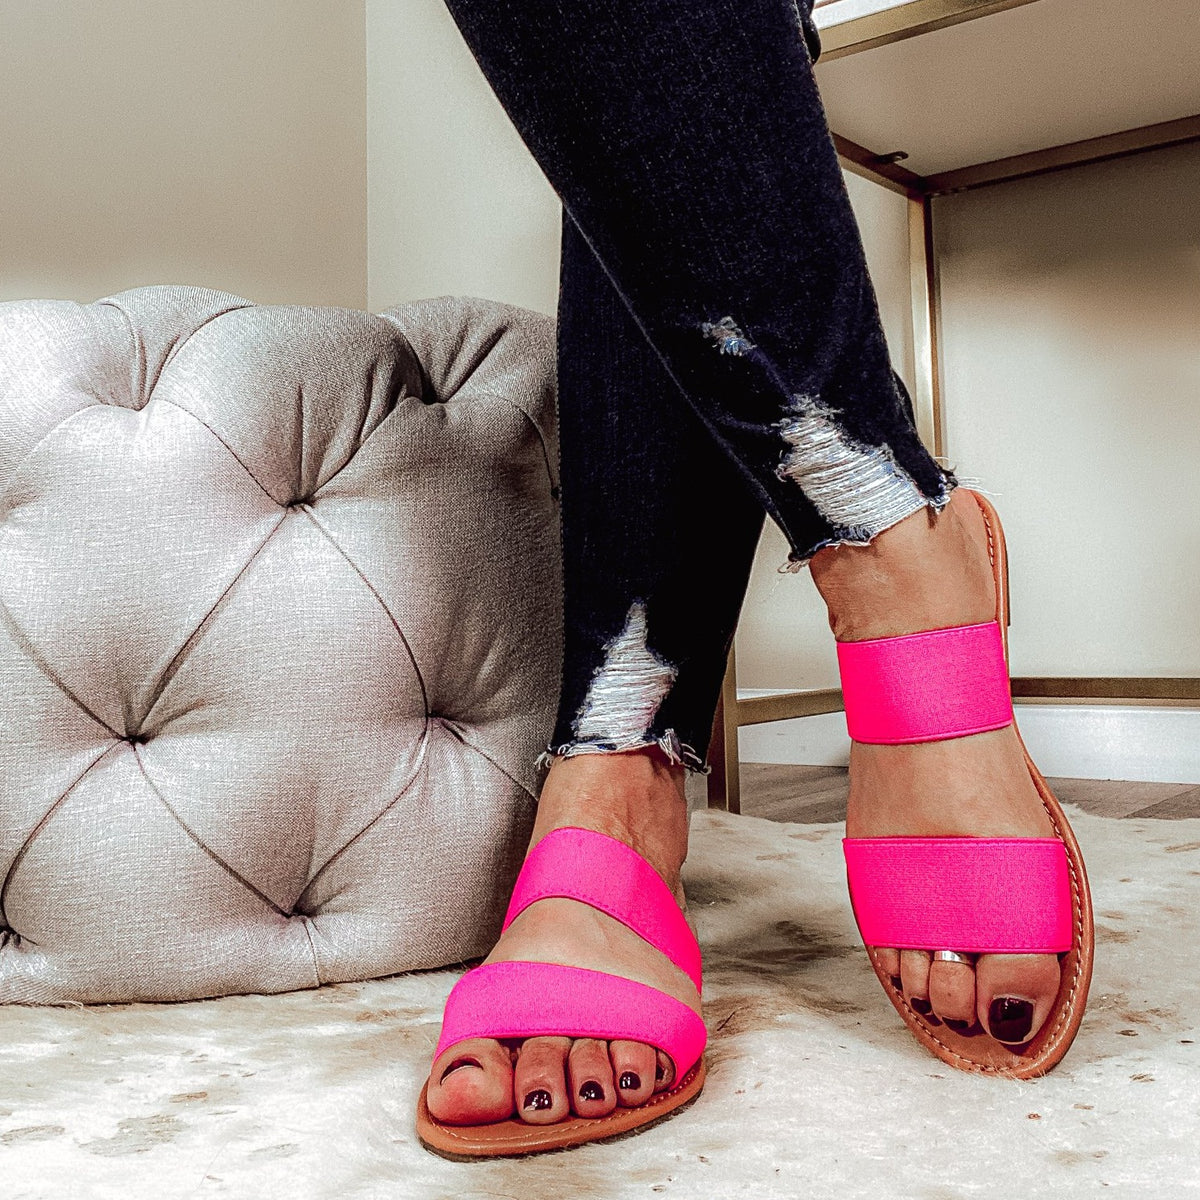 The Sweetest Thang Hot Pink Strap Sandals